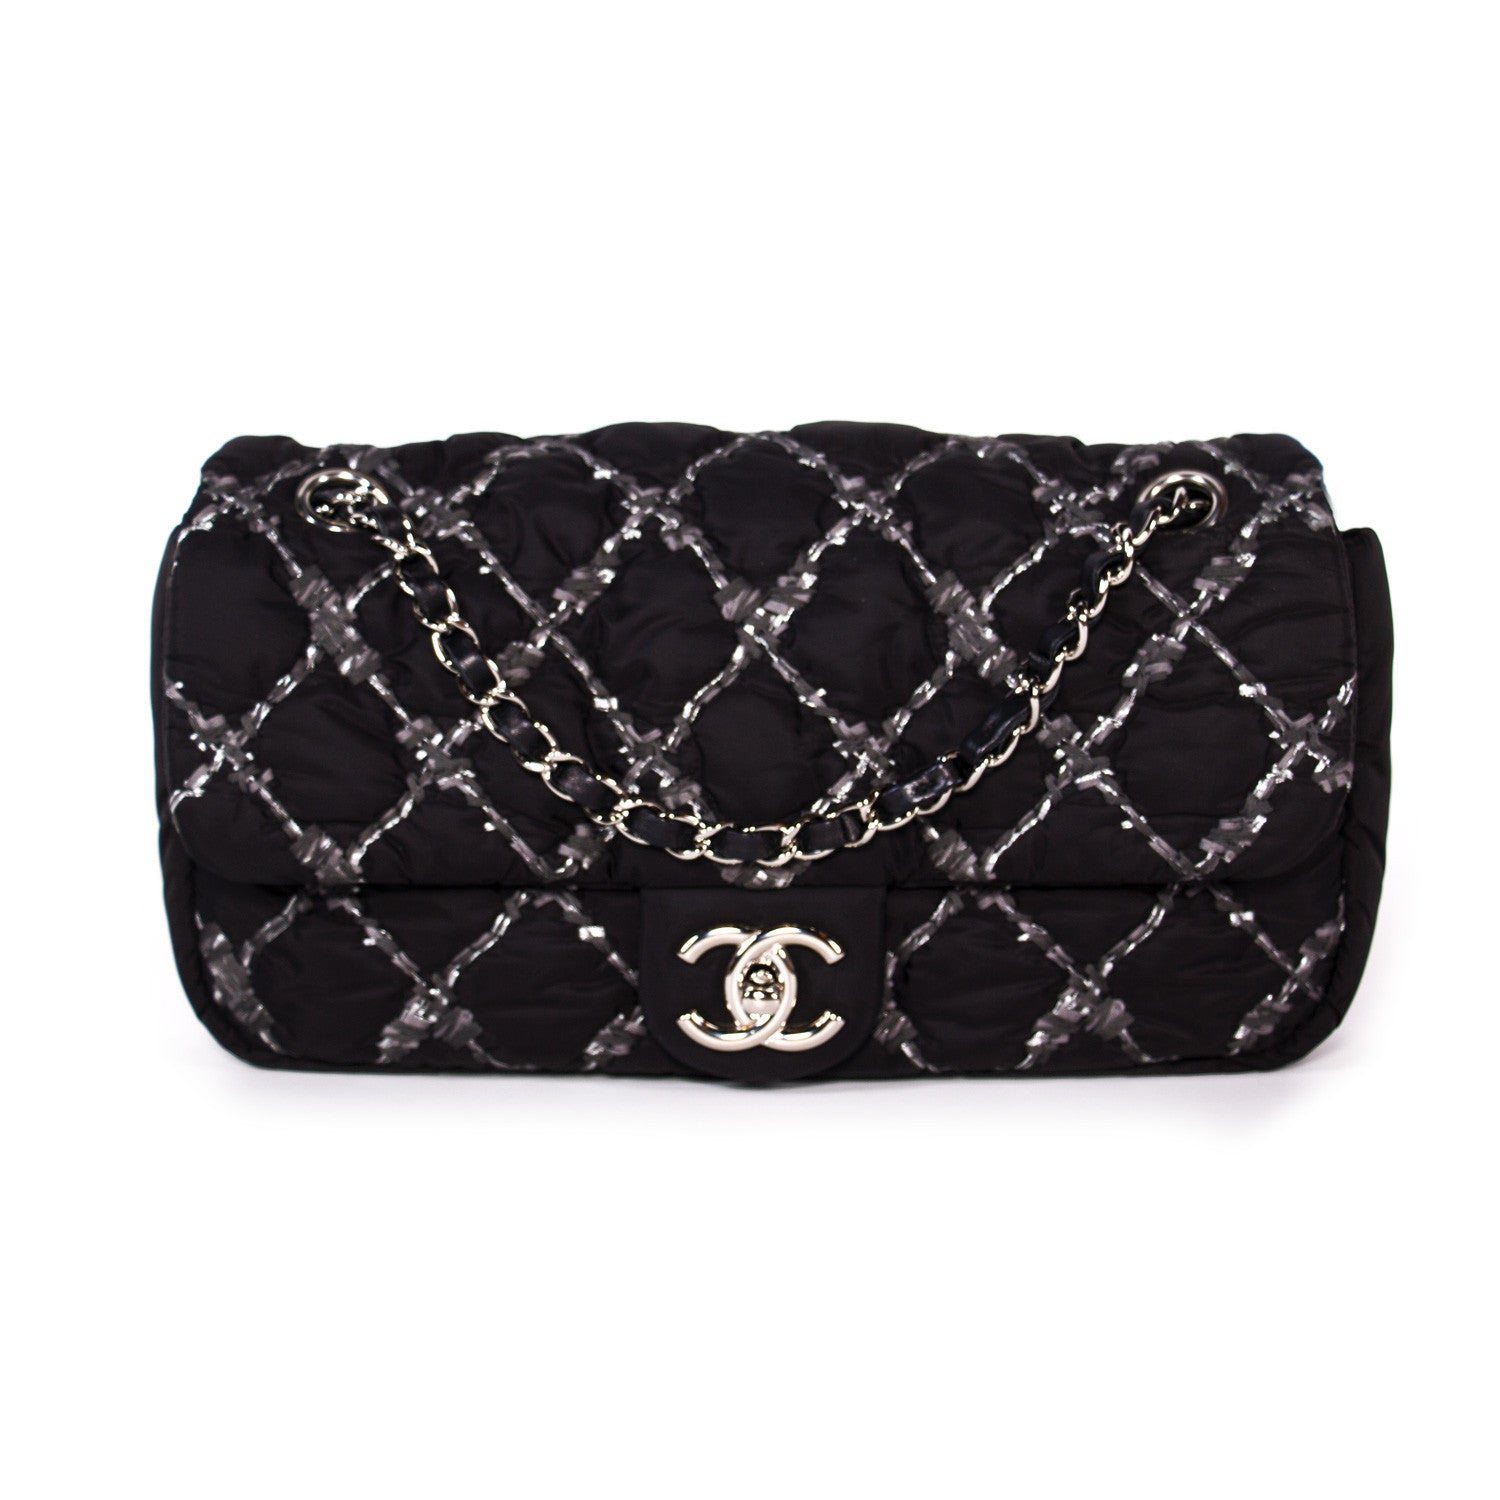 Limited Edition CHANEL Tweed on Stitch Bubble Tote Handbag